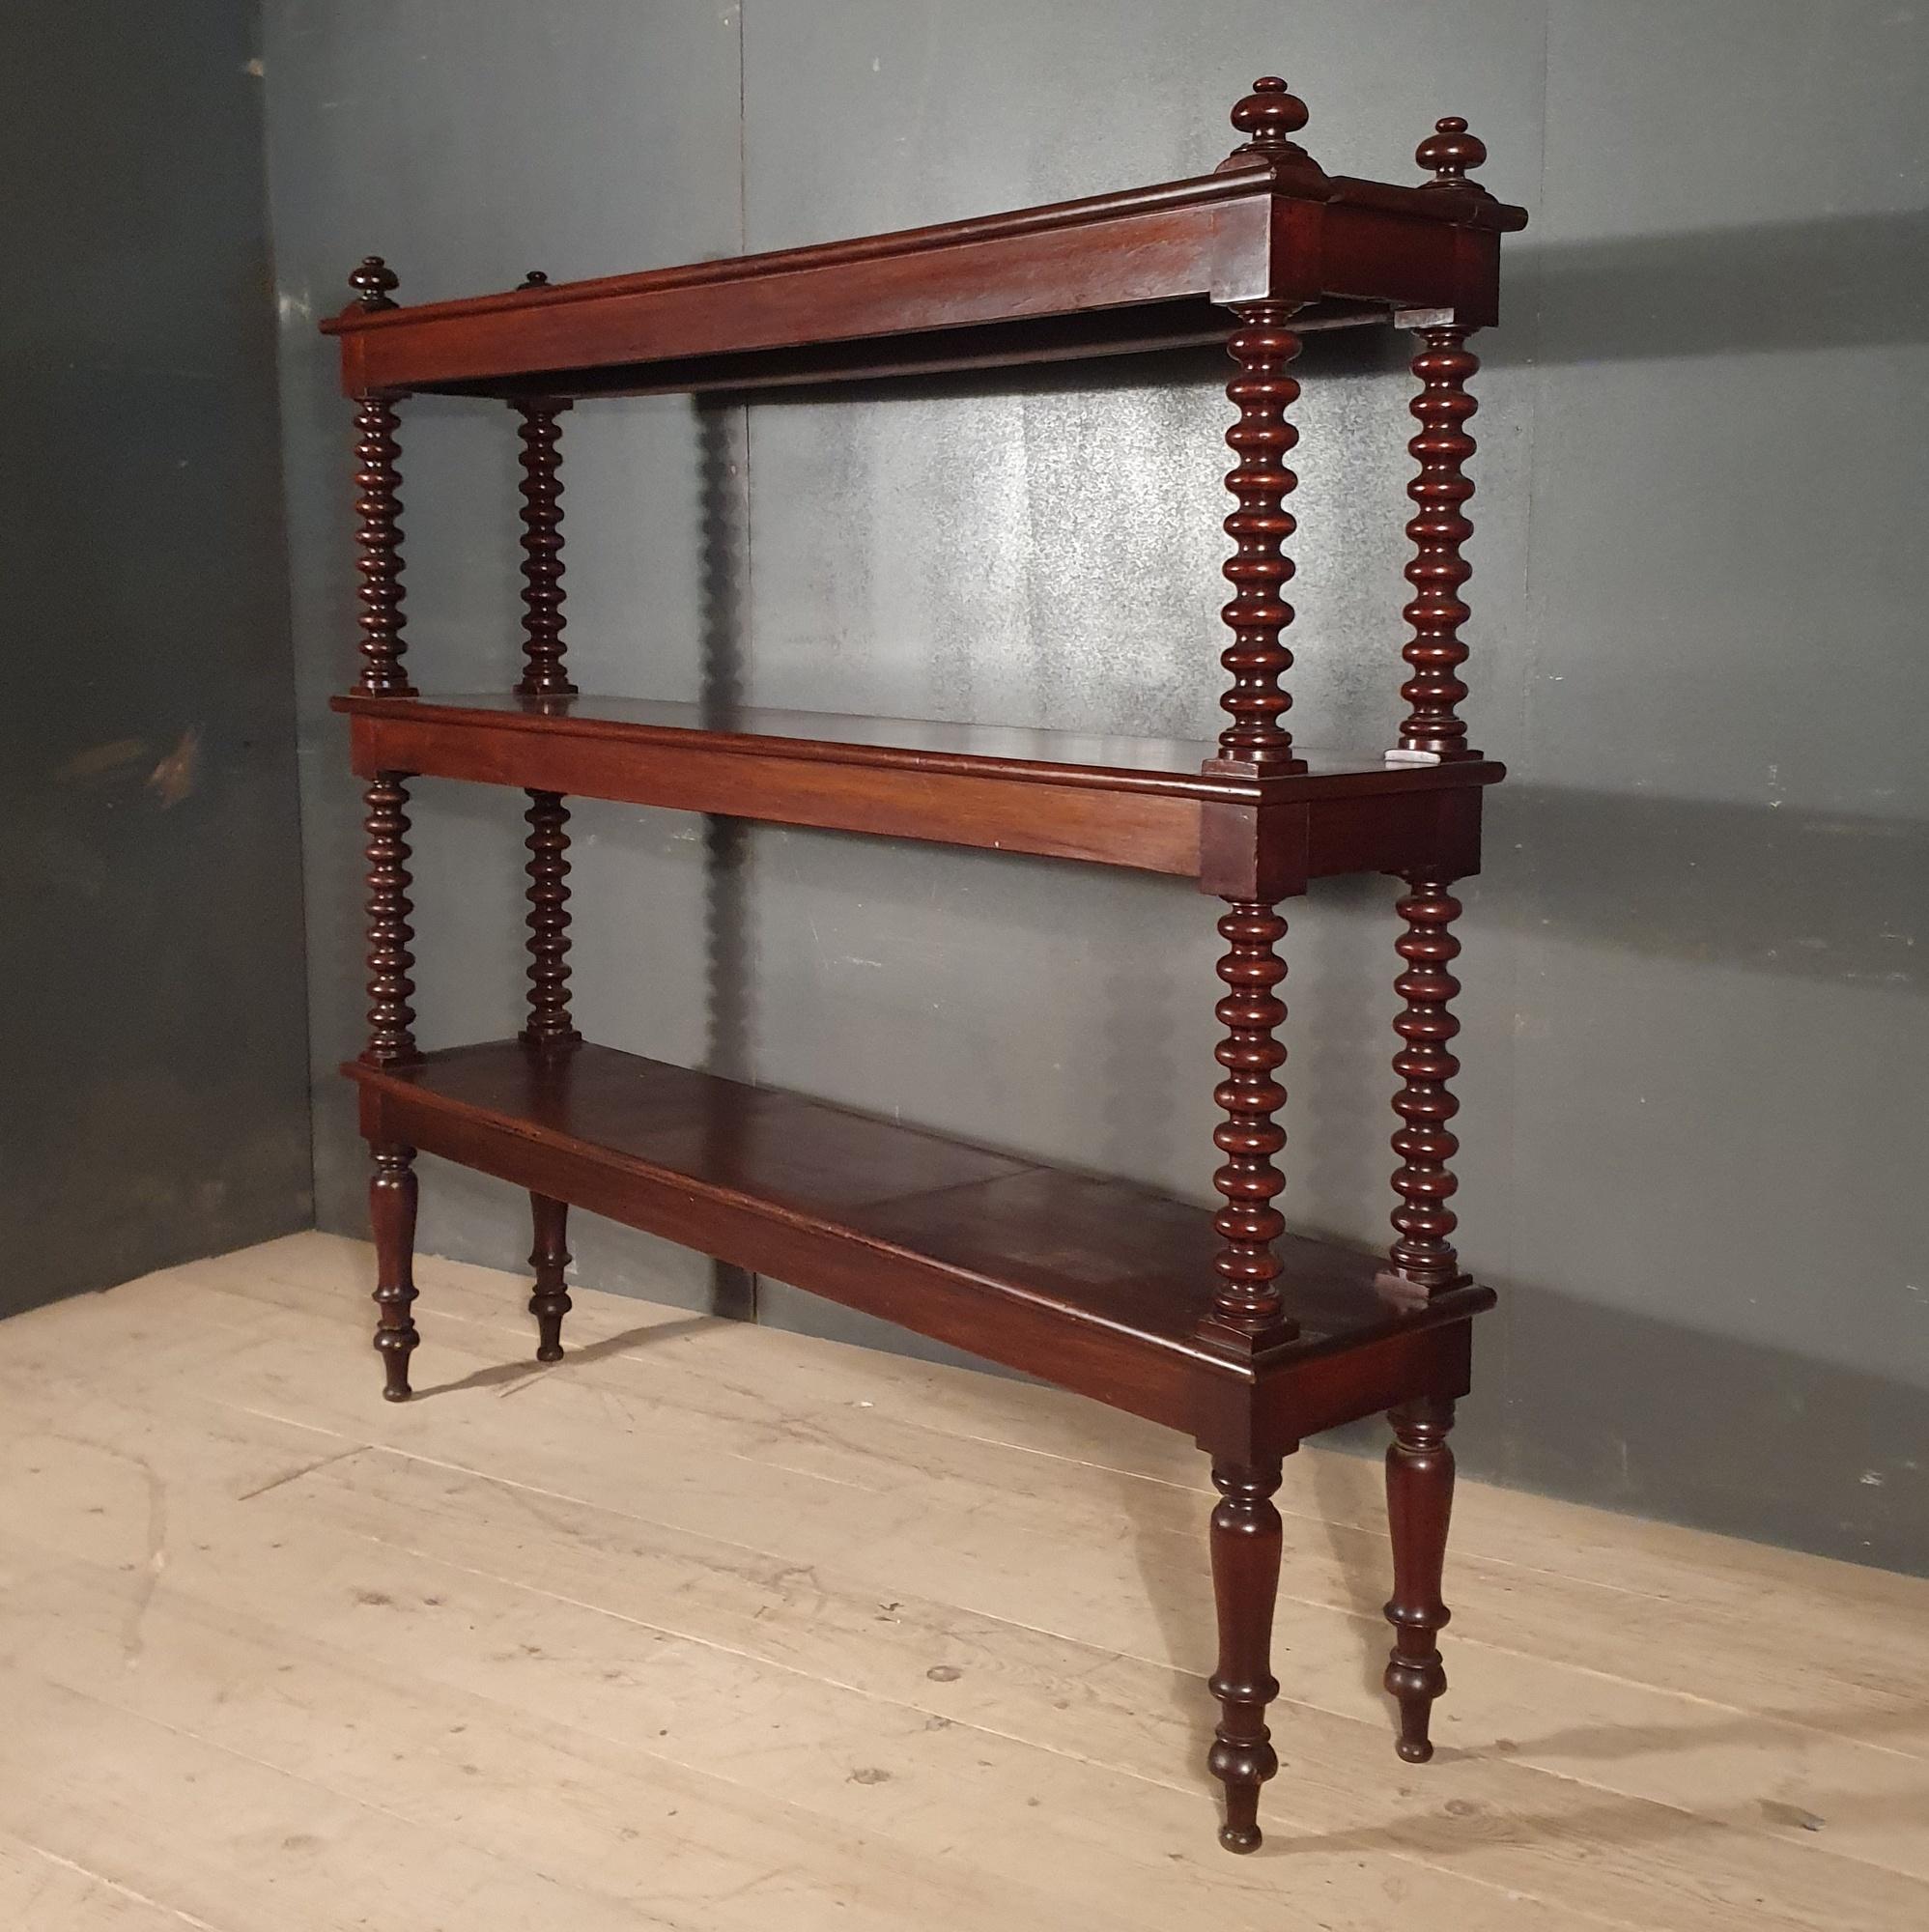 19th century tall Scottish mahogany three-tier whatnot/buffet, 1850.

Dimensions:
67.5 inches (171 cms) wide
13.5 inches (34 cms) deep
62 inches (157 cms) high.